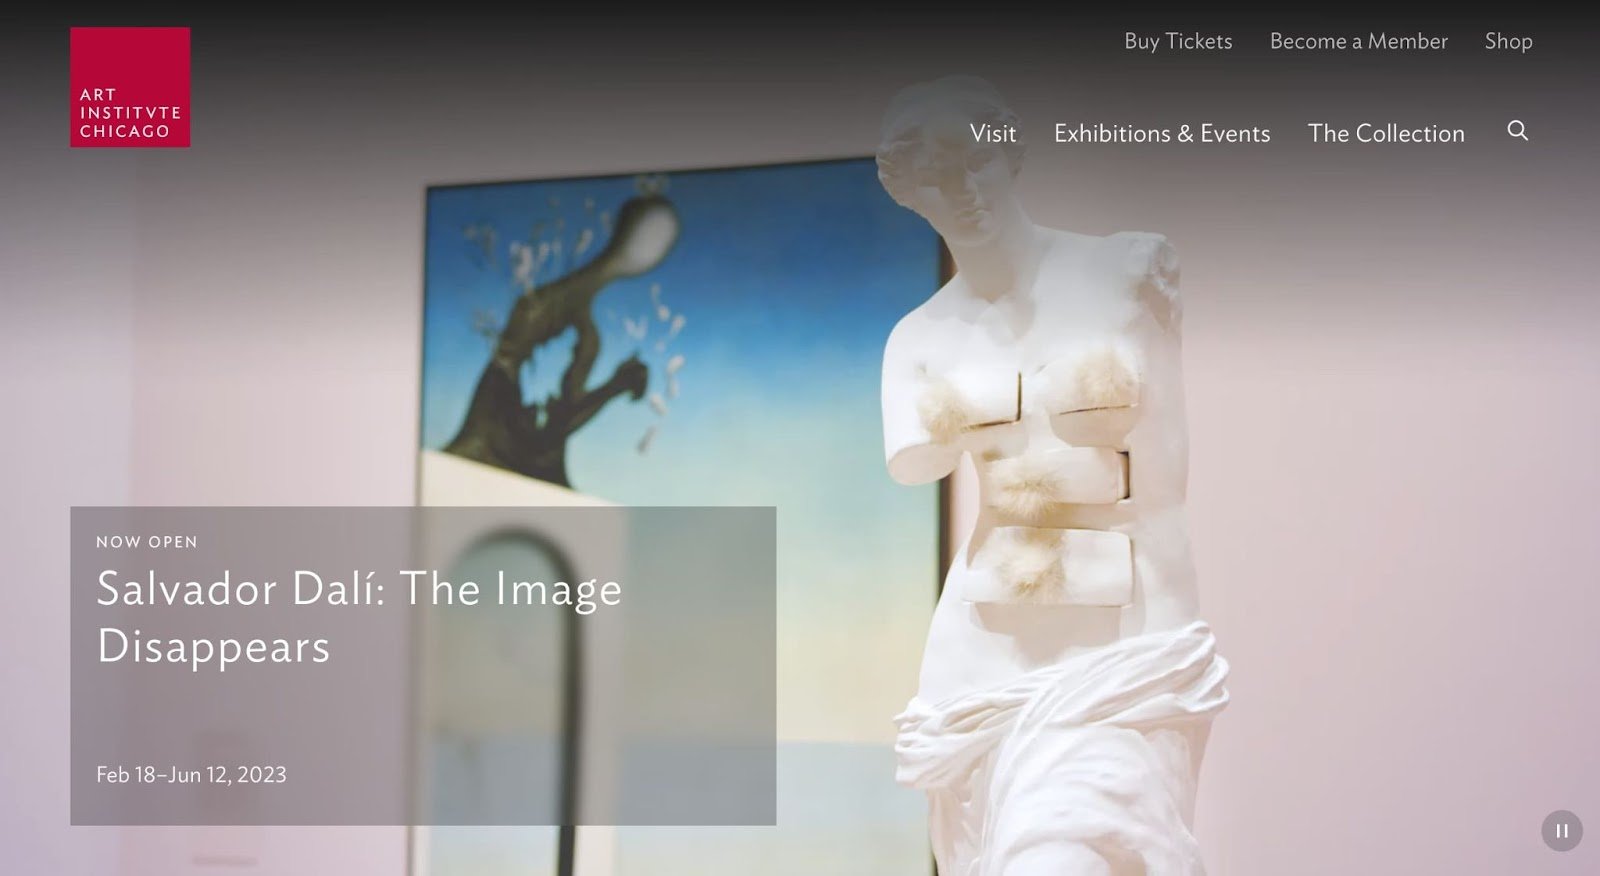 homepage for the museum website the art institute of chicago